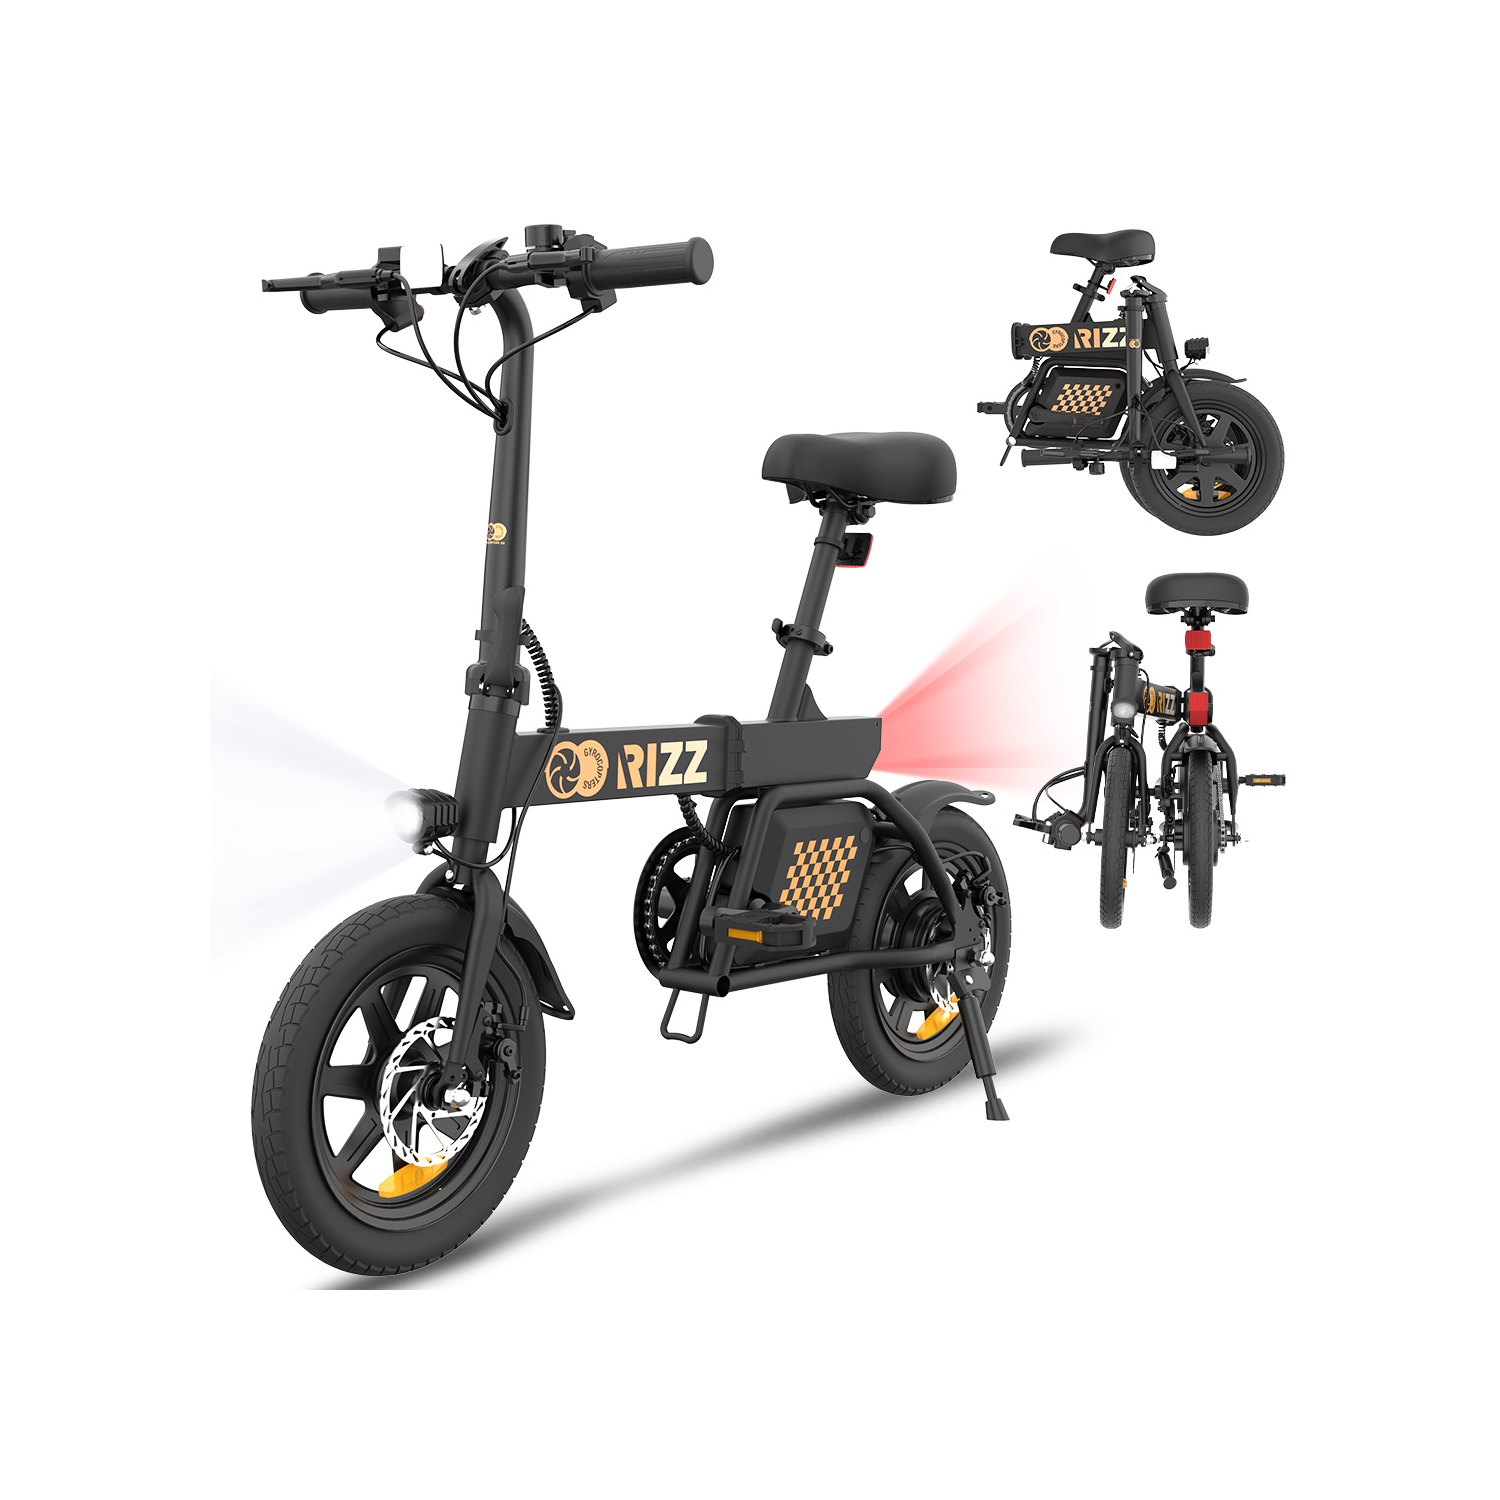 Gyrocopters Rizz Foldable Electric Bike, up to 55 km ( 34 mi) PAS range, up to 25km/h (15.5 mph) speed by 350 W motor, UL-2849 safety approve, 3 riding modes